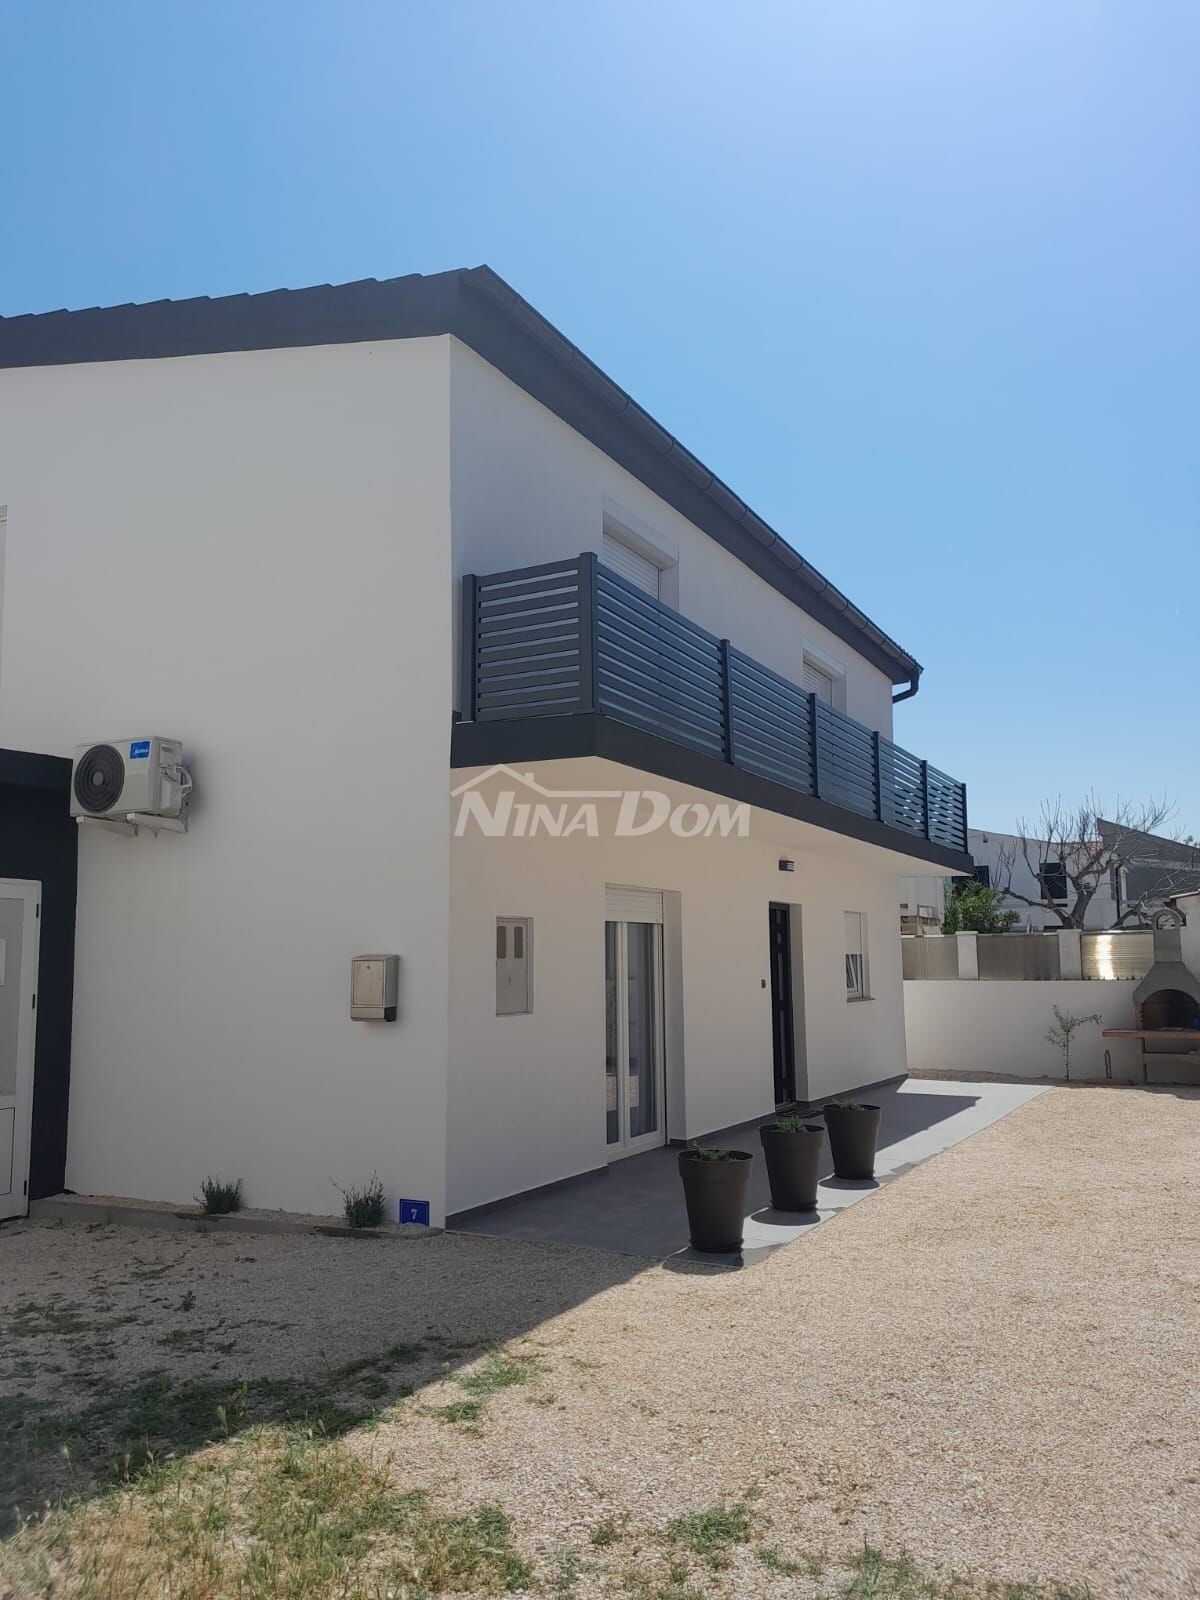 House 50 m from the sea, completely renovated on the outside, ground floor inside.